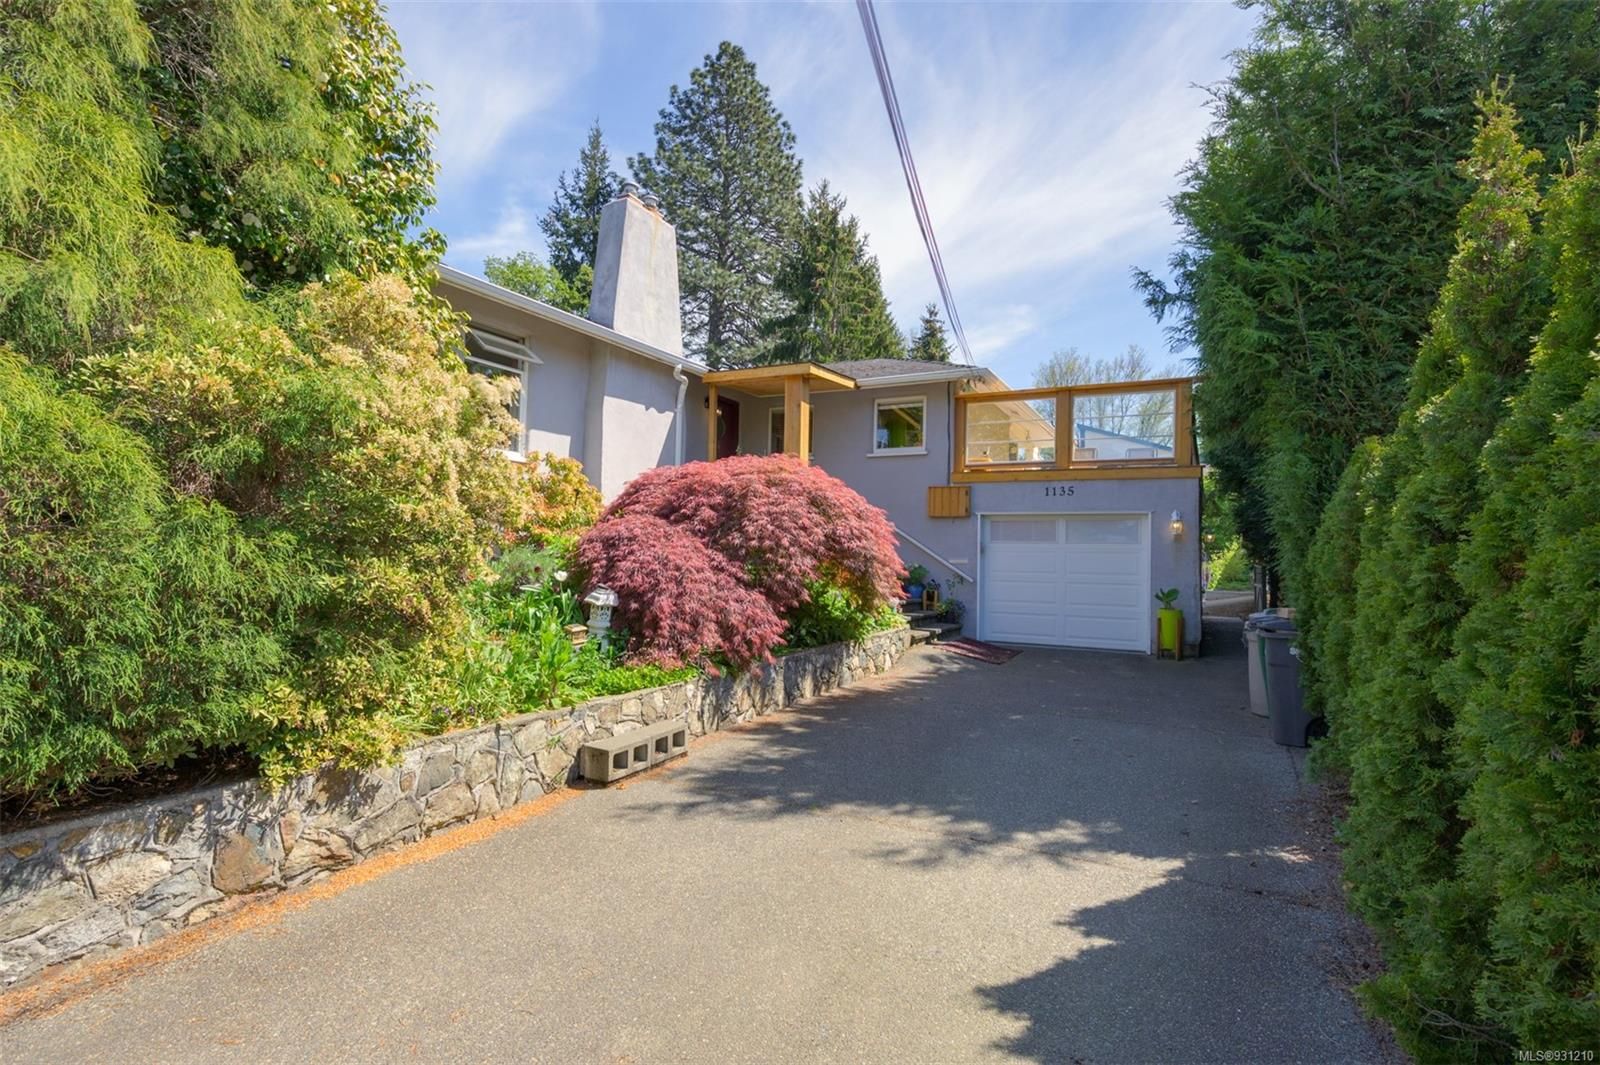 I have sold a property at 1135 Reynolds Rd in Saanich
